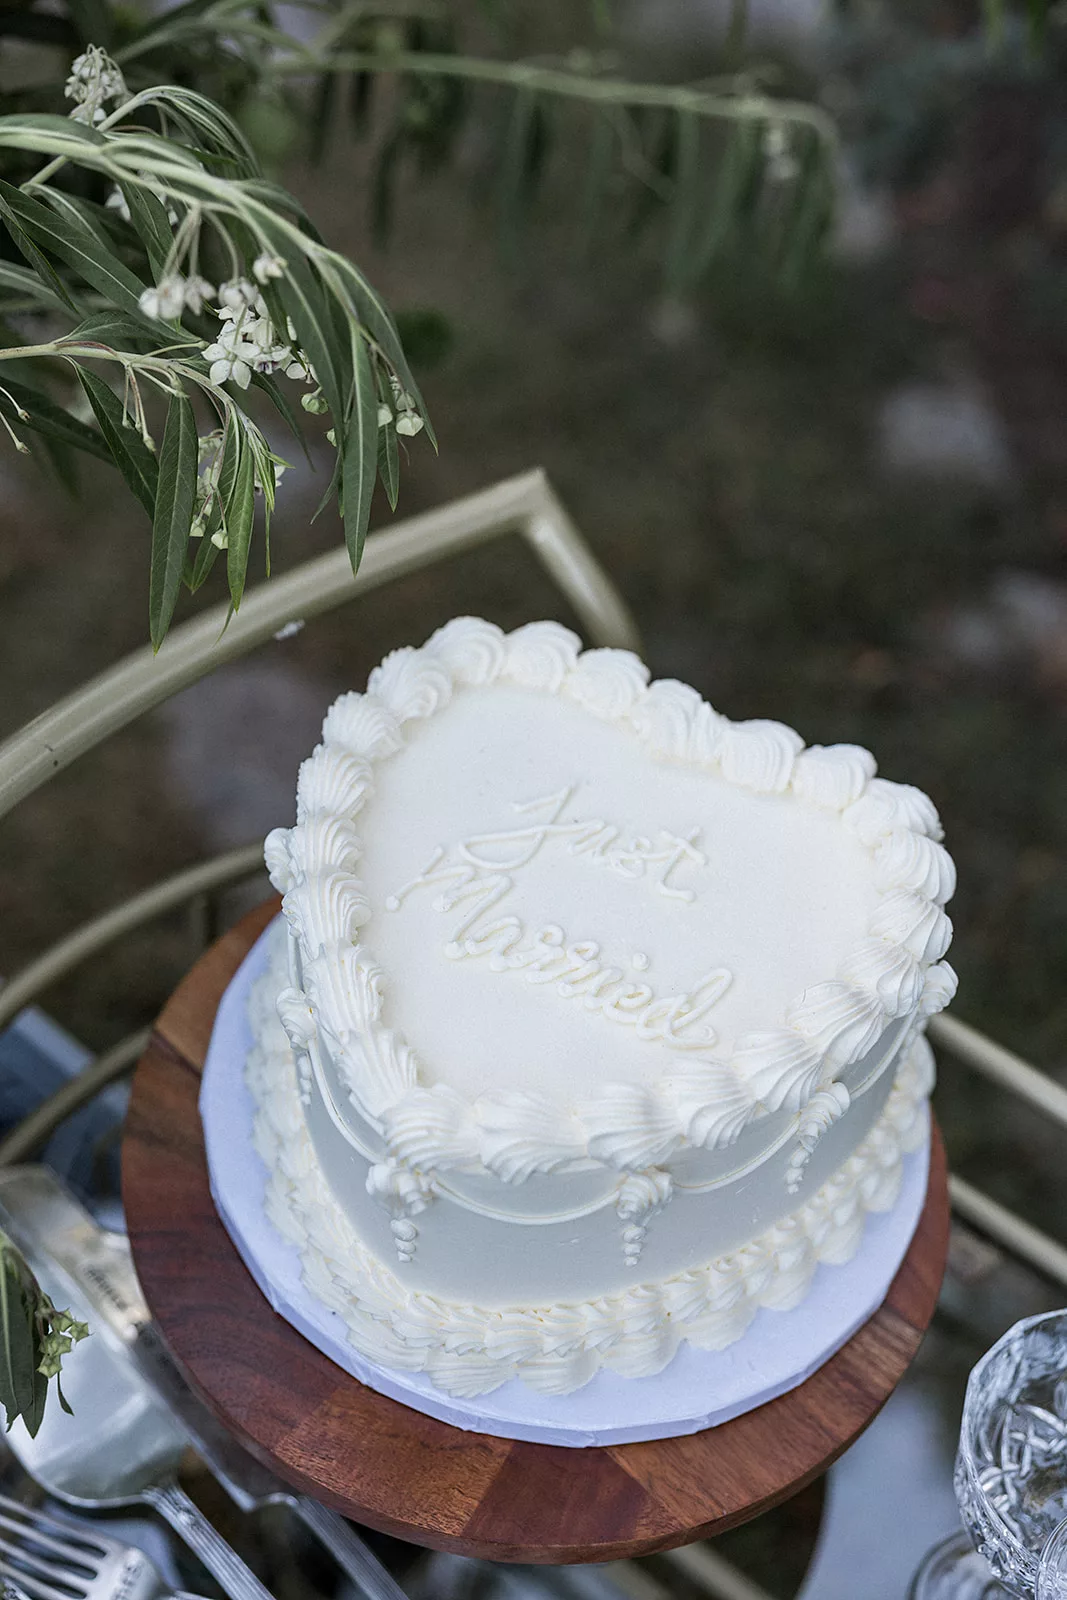 Details of a small wedding cake sitting on a cart outdoors